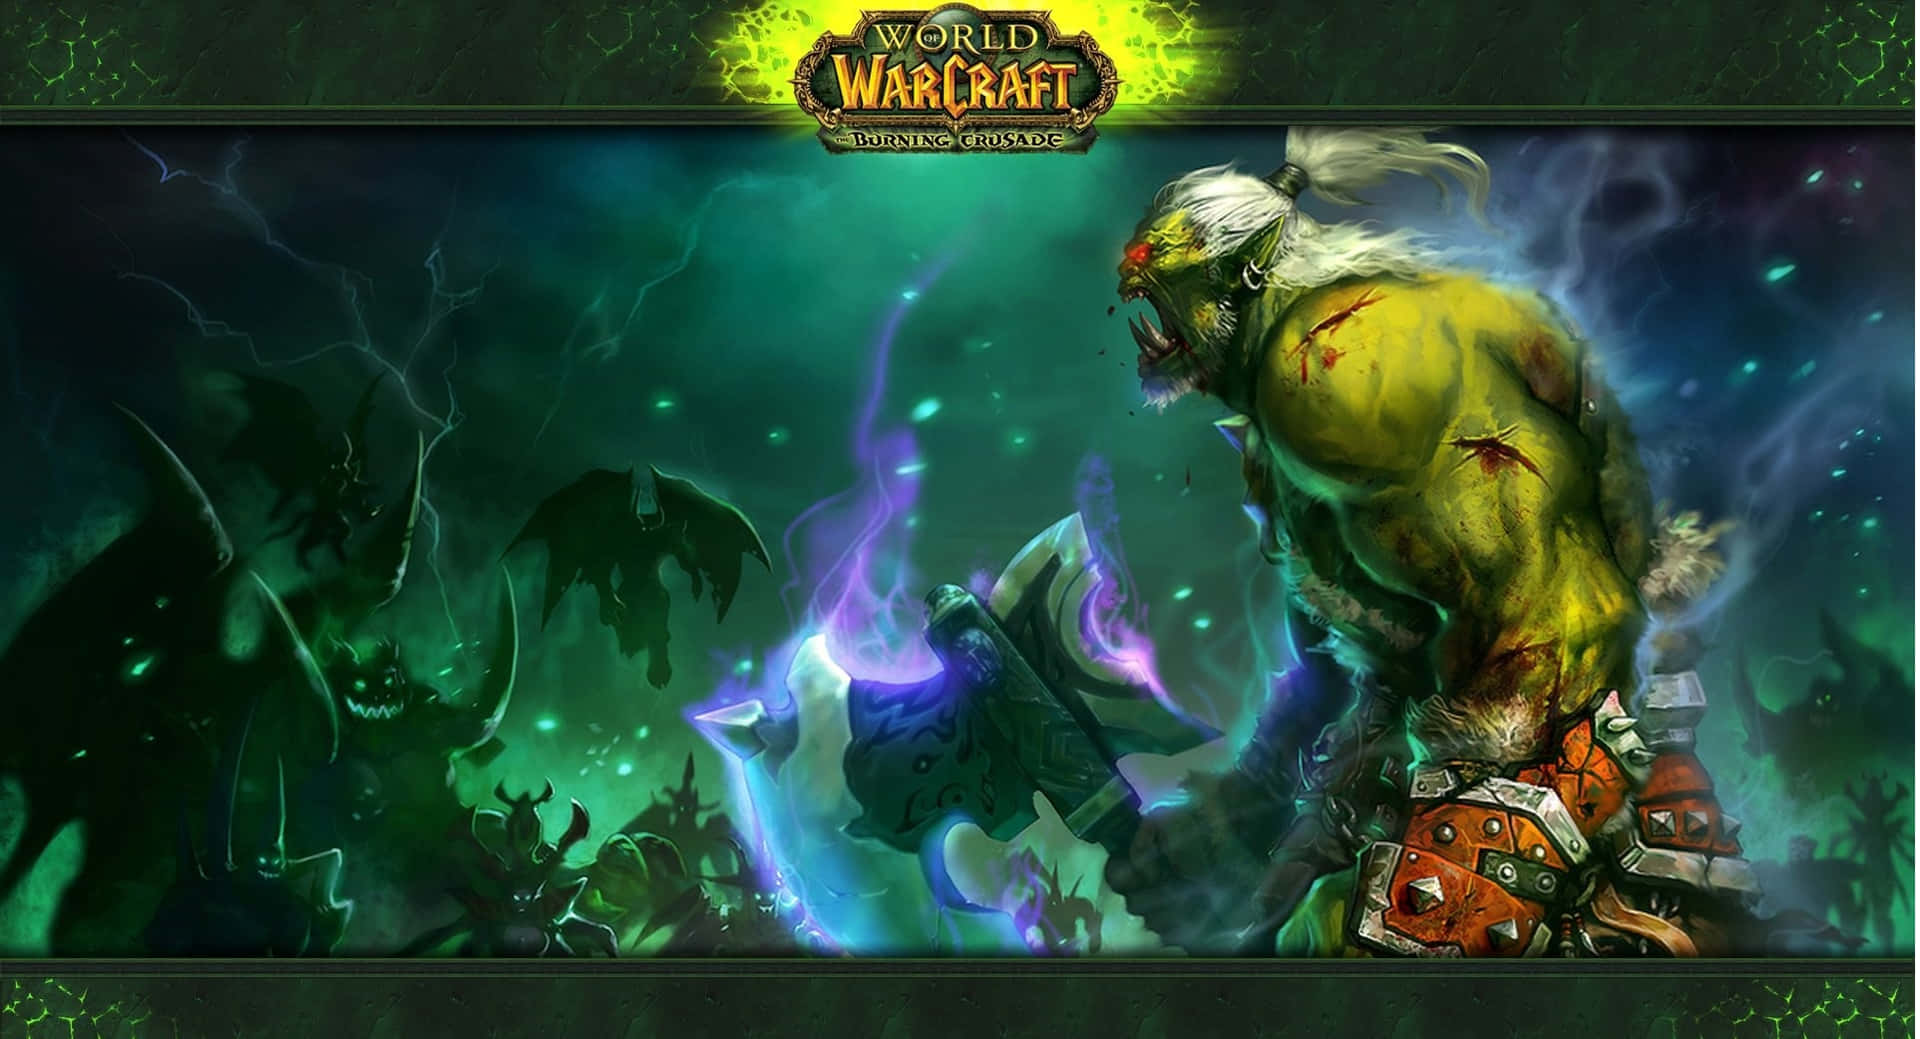 The Captivating Return To The Classic World Of Warcraft With The Burning Crusade Expansion. Wallpaper